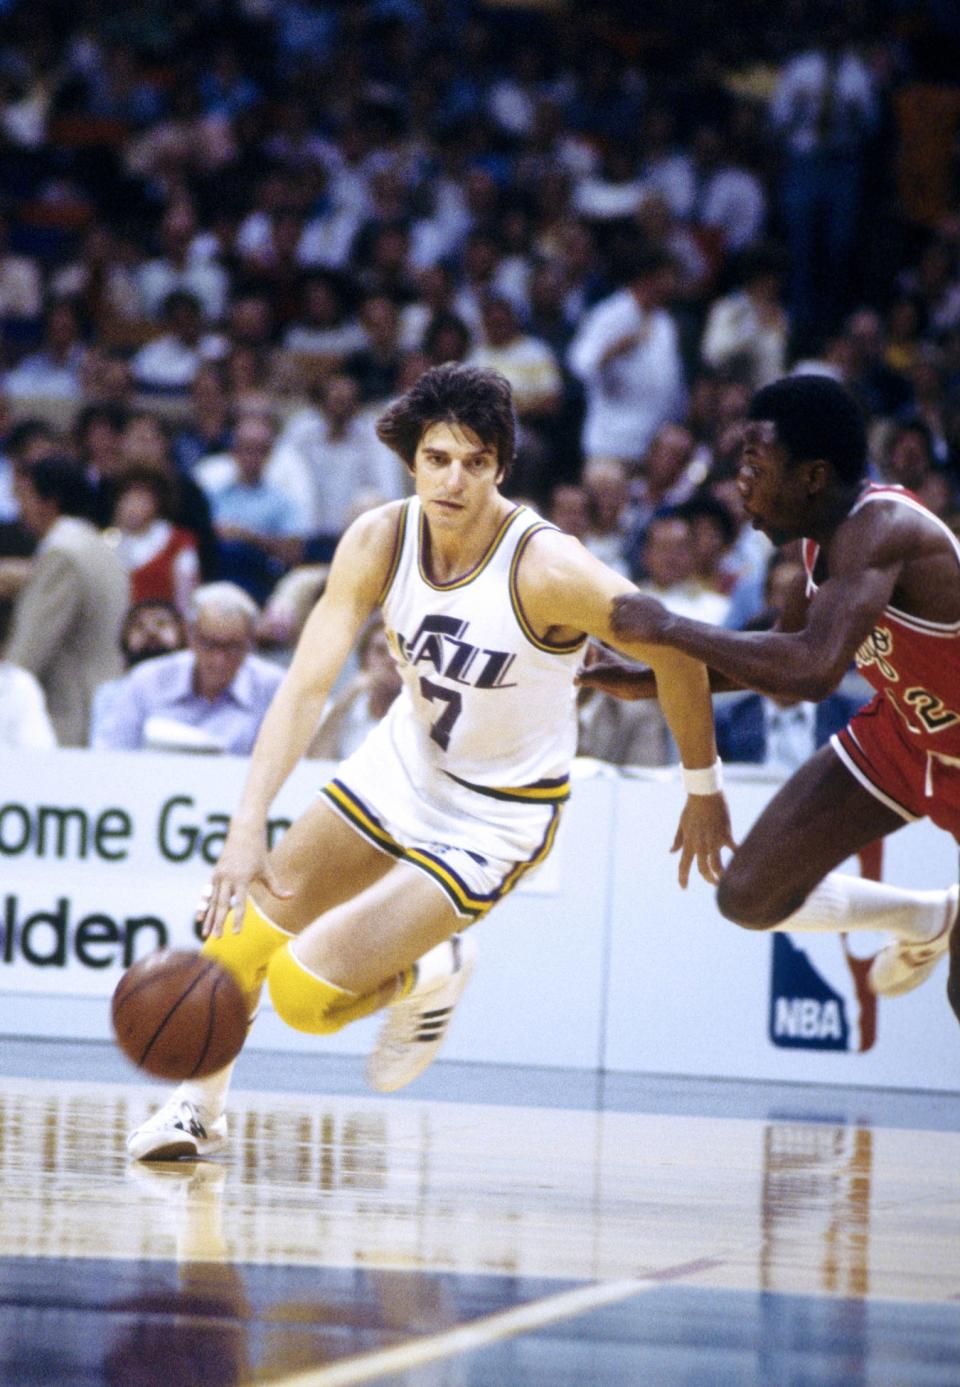 Pete Maravich played six seasons with the New Orleans and Utah Jazz, leading the NBA in scoring (31.1 ppg) in 1976-77 and finishing third in the MVP voting.